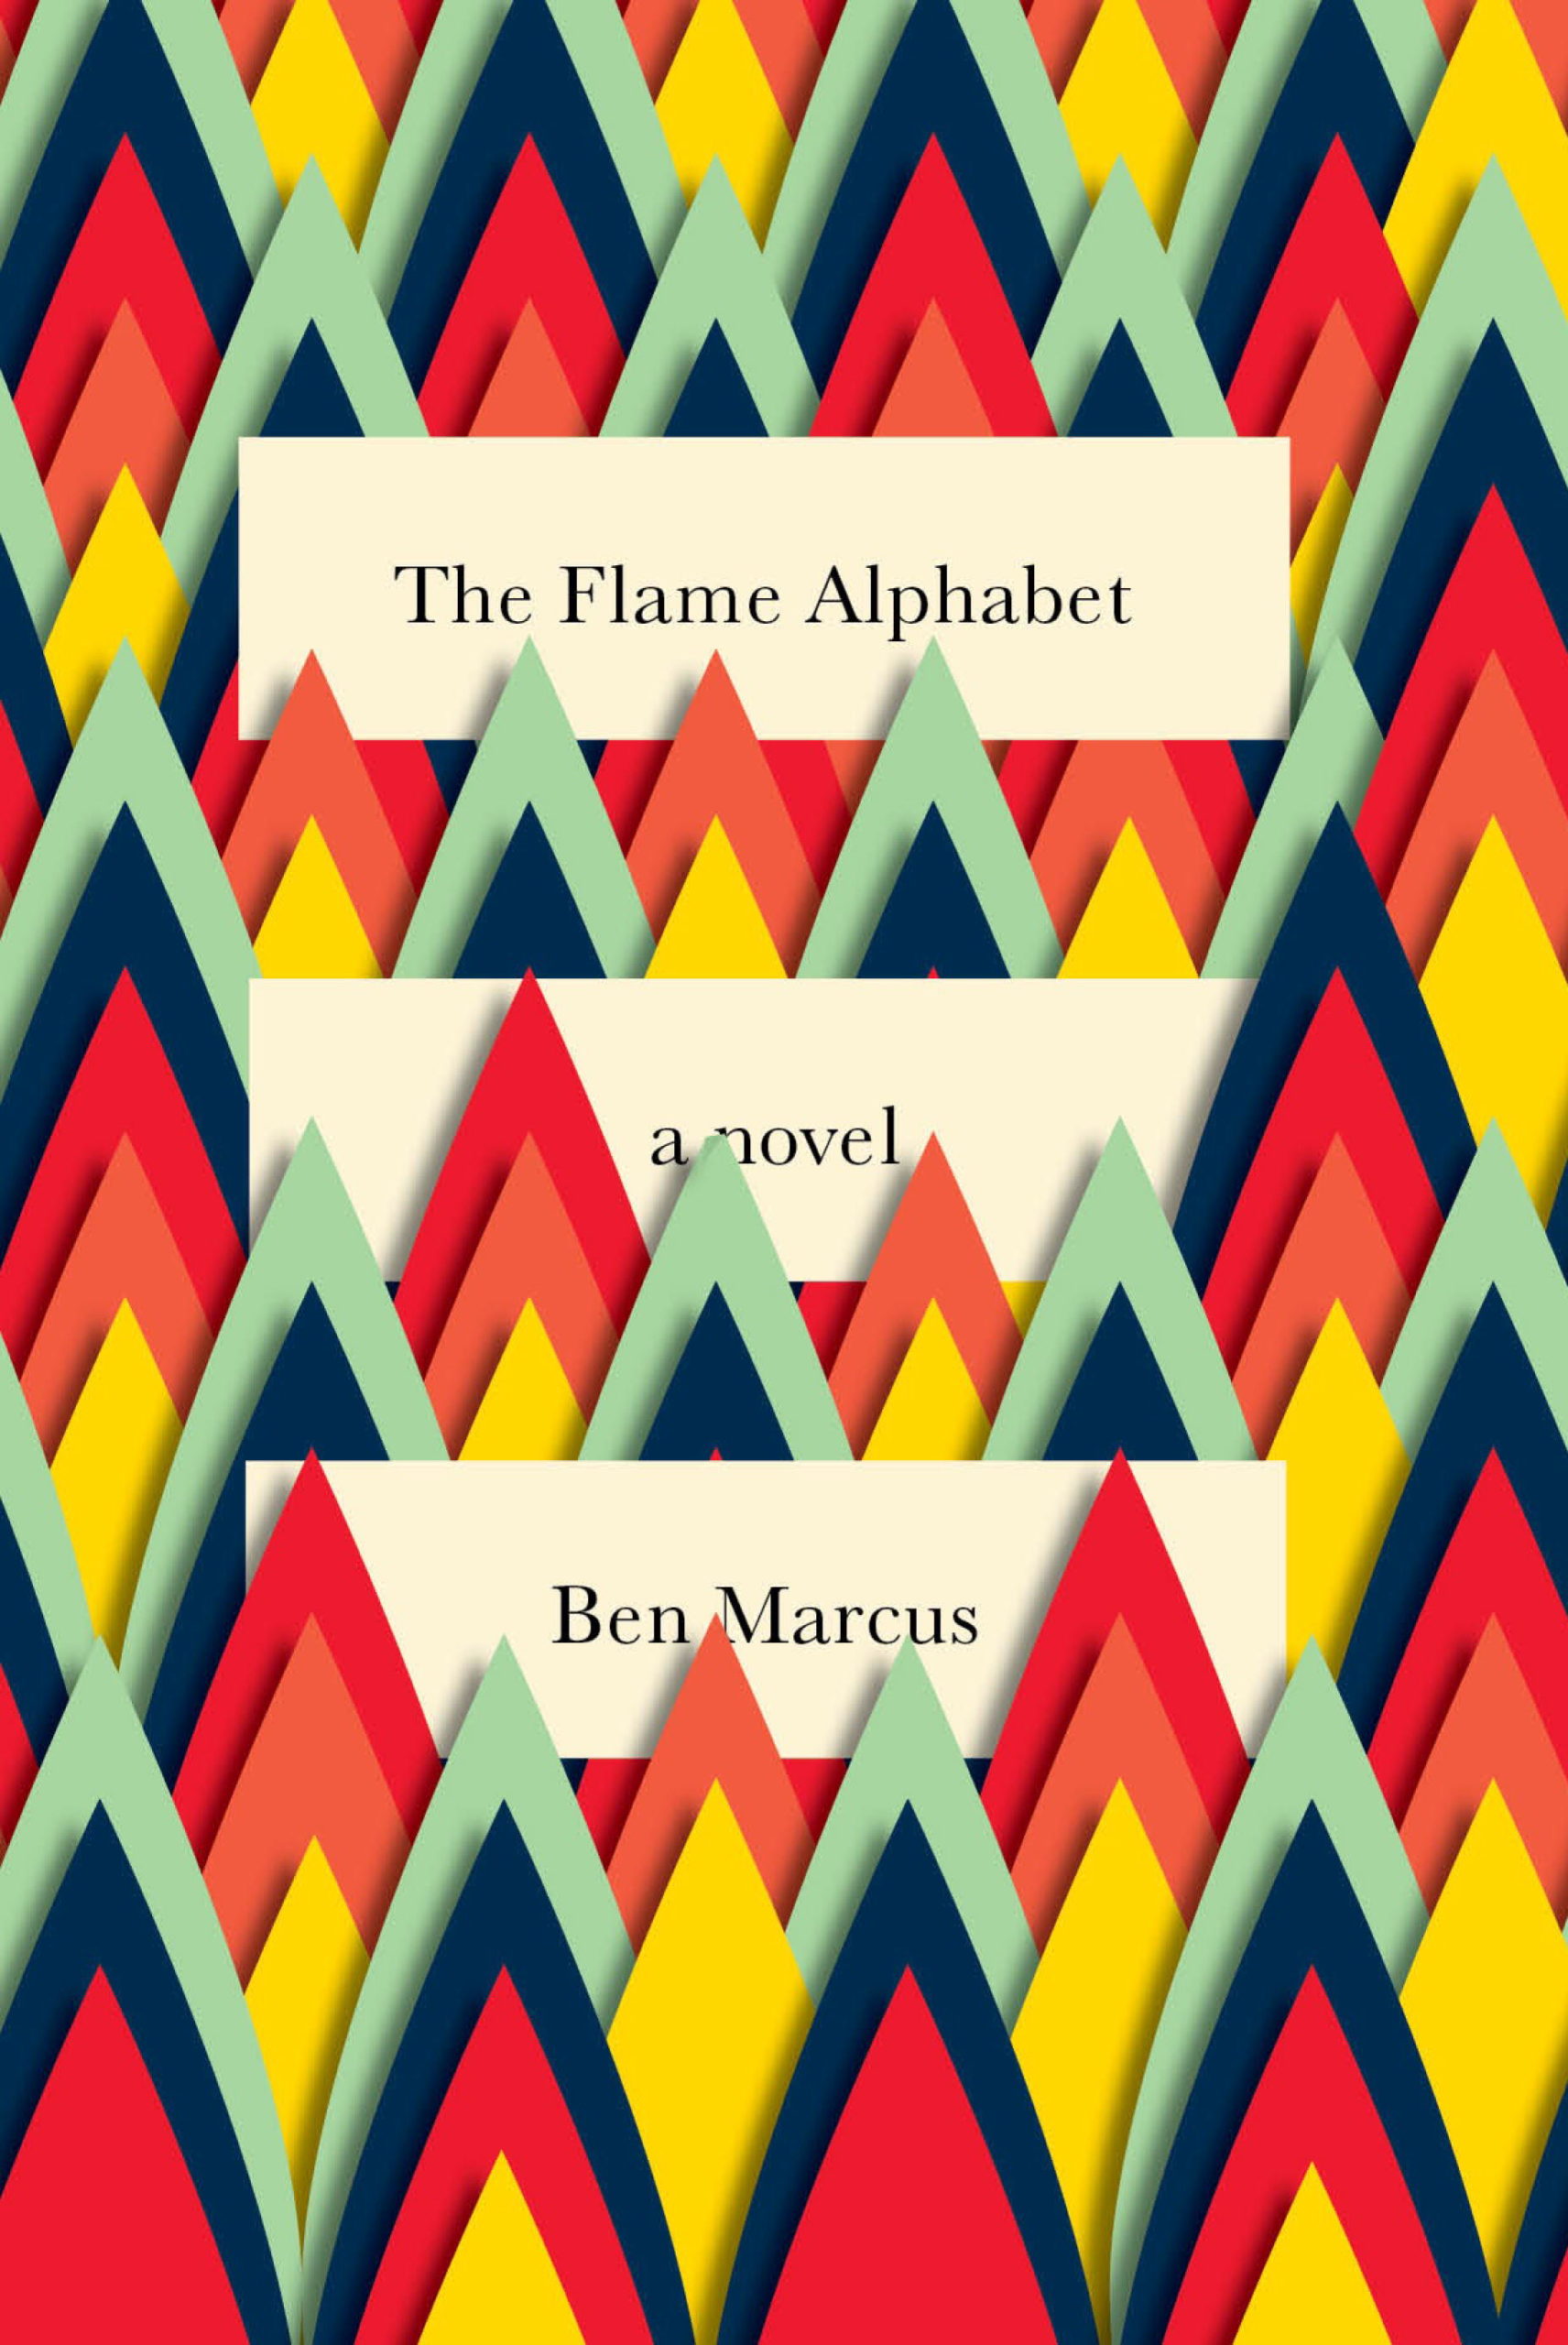 11 Of The Most Beautiful Book Covers From 2012